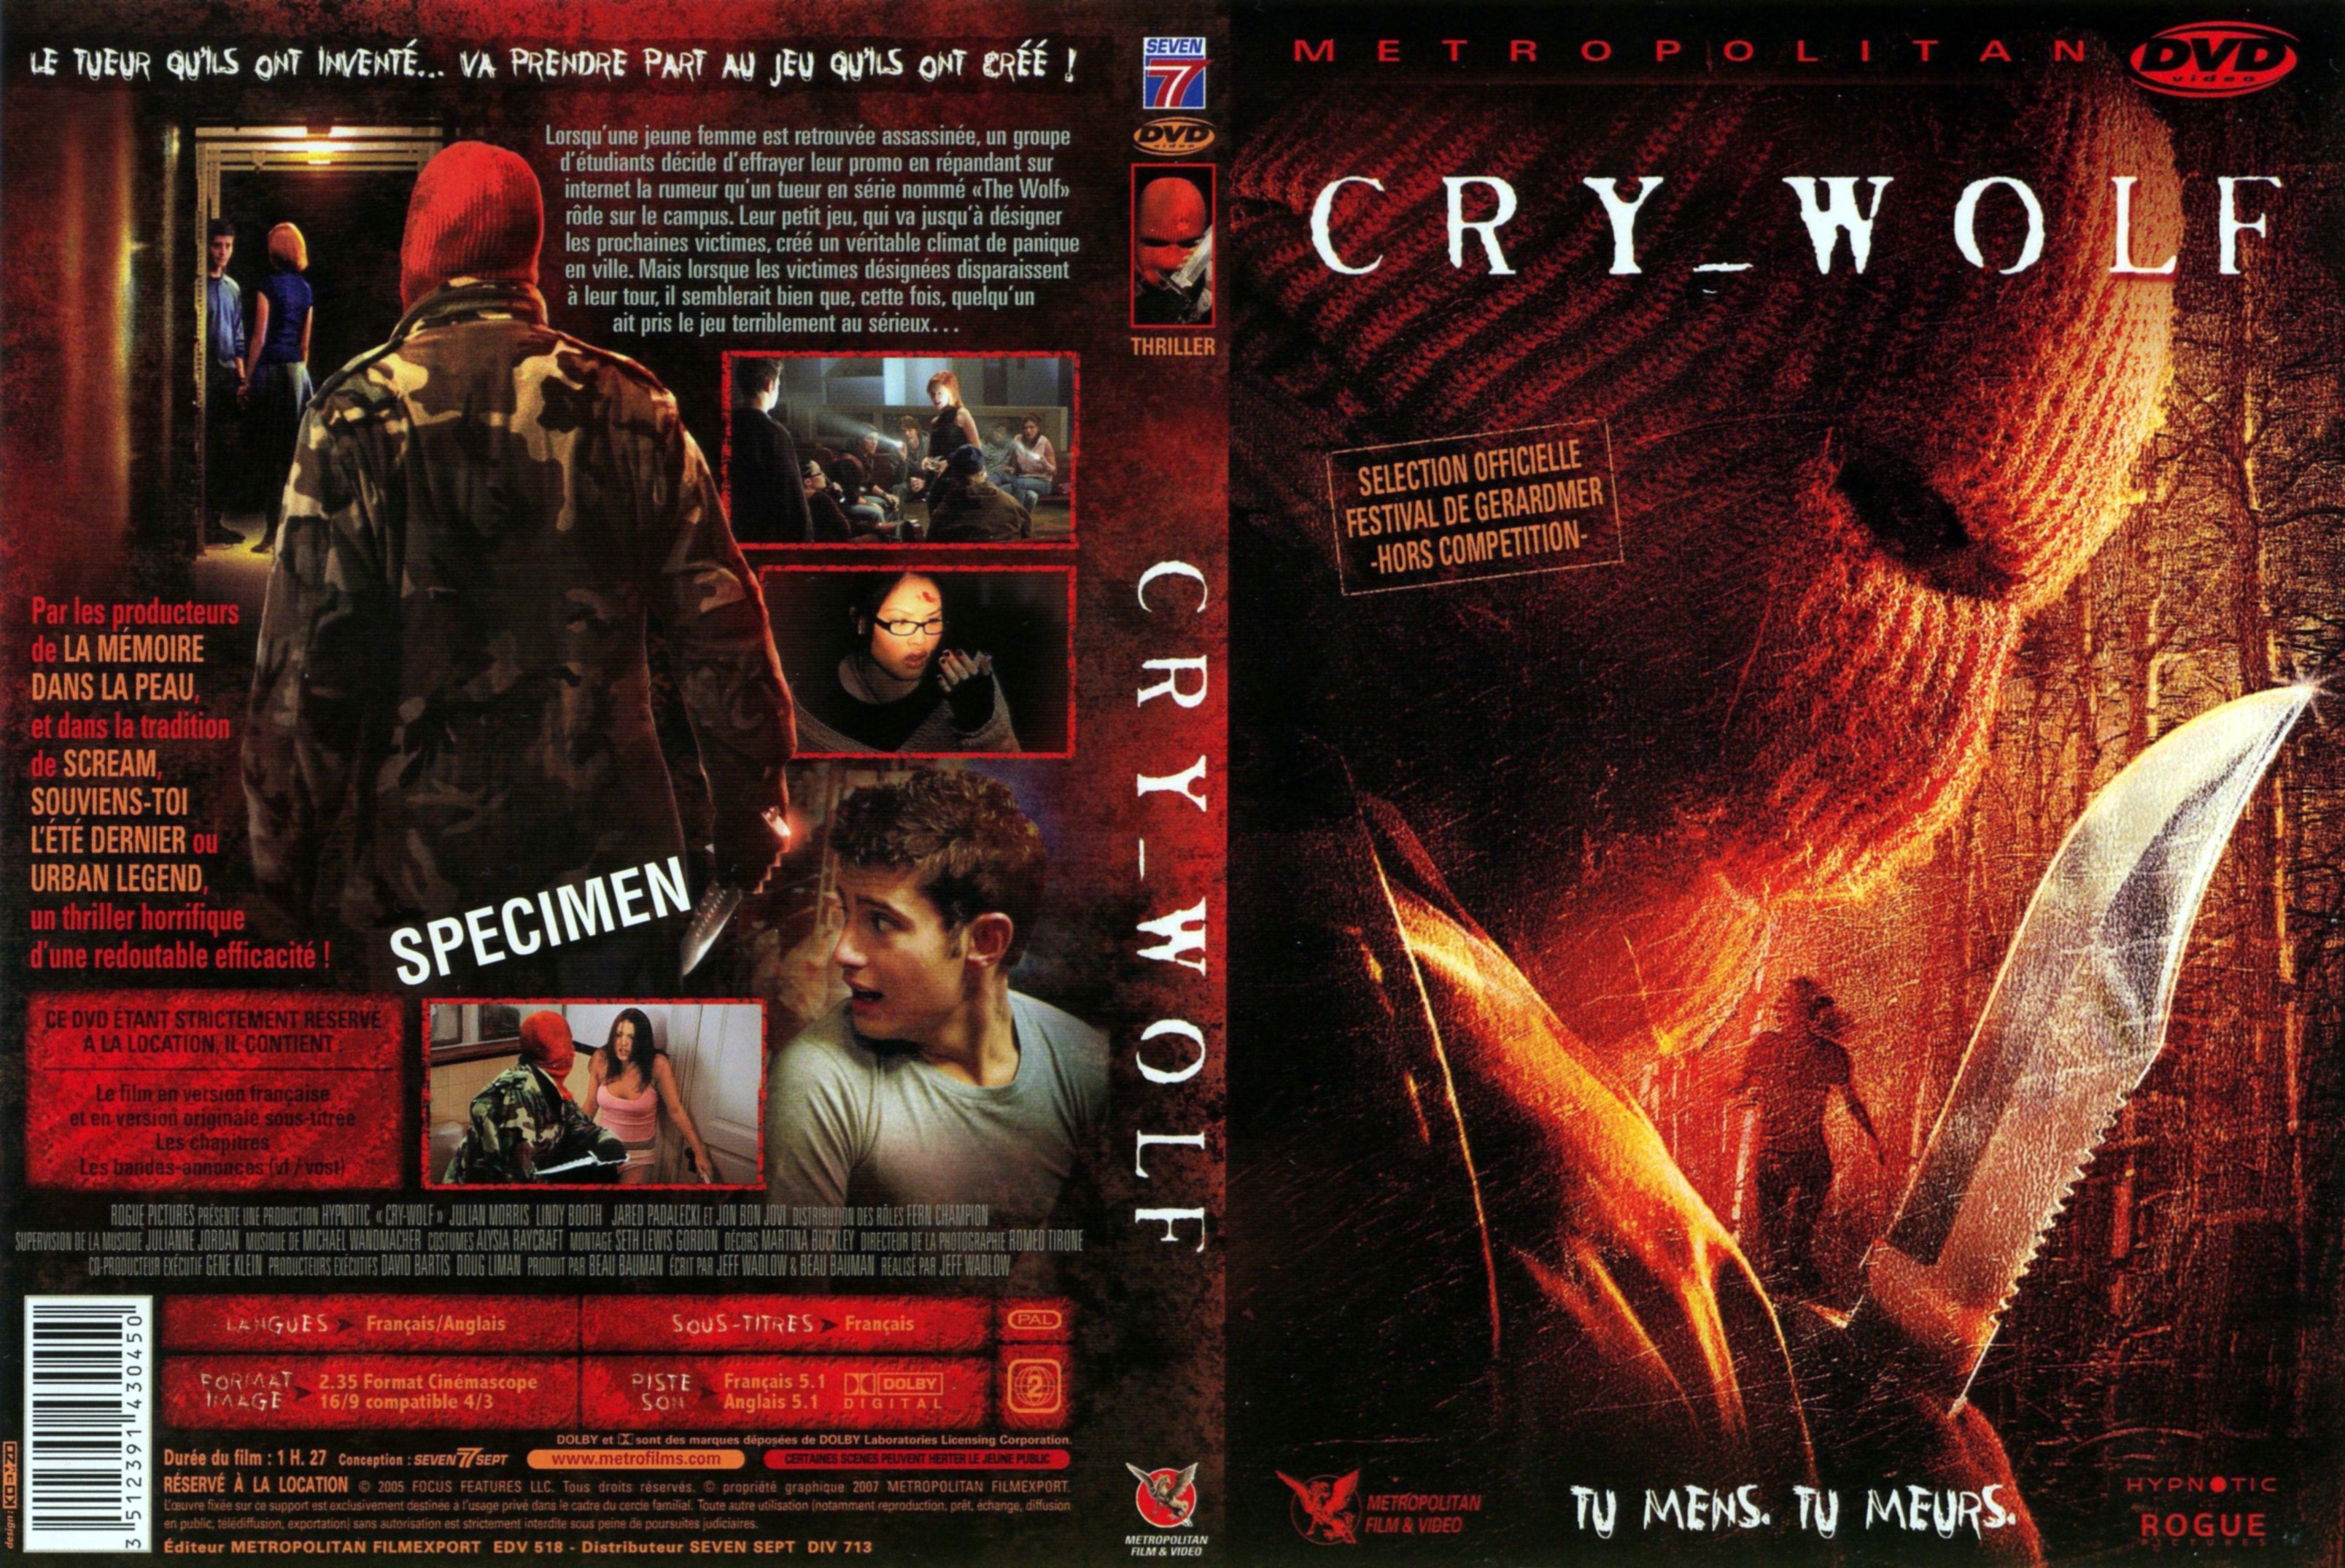 Jaquette DVD Cry wolf